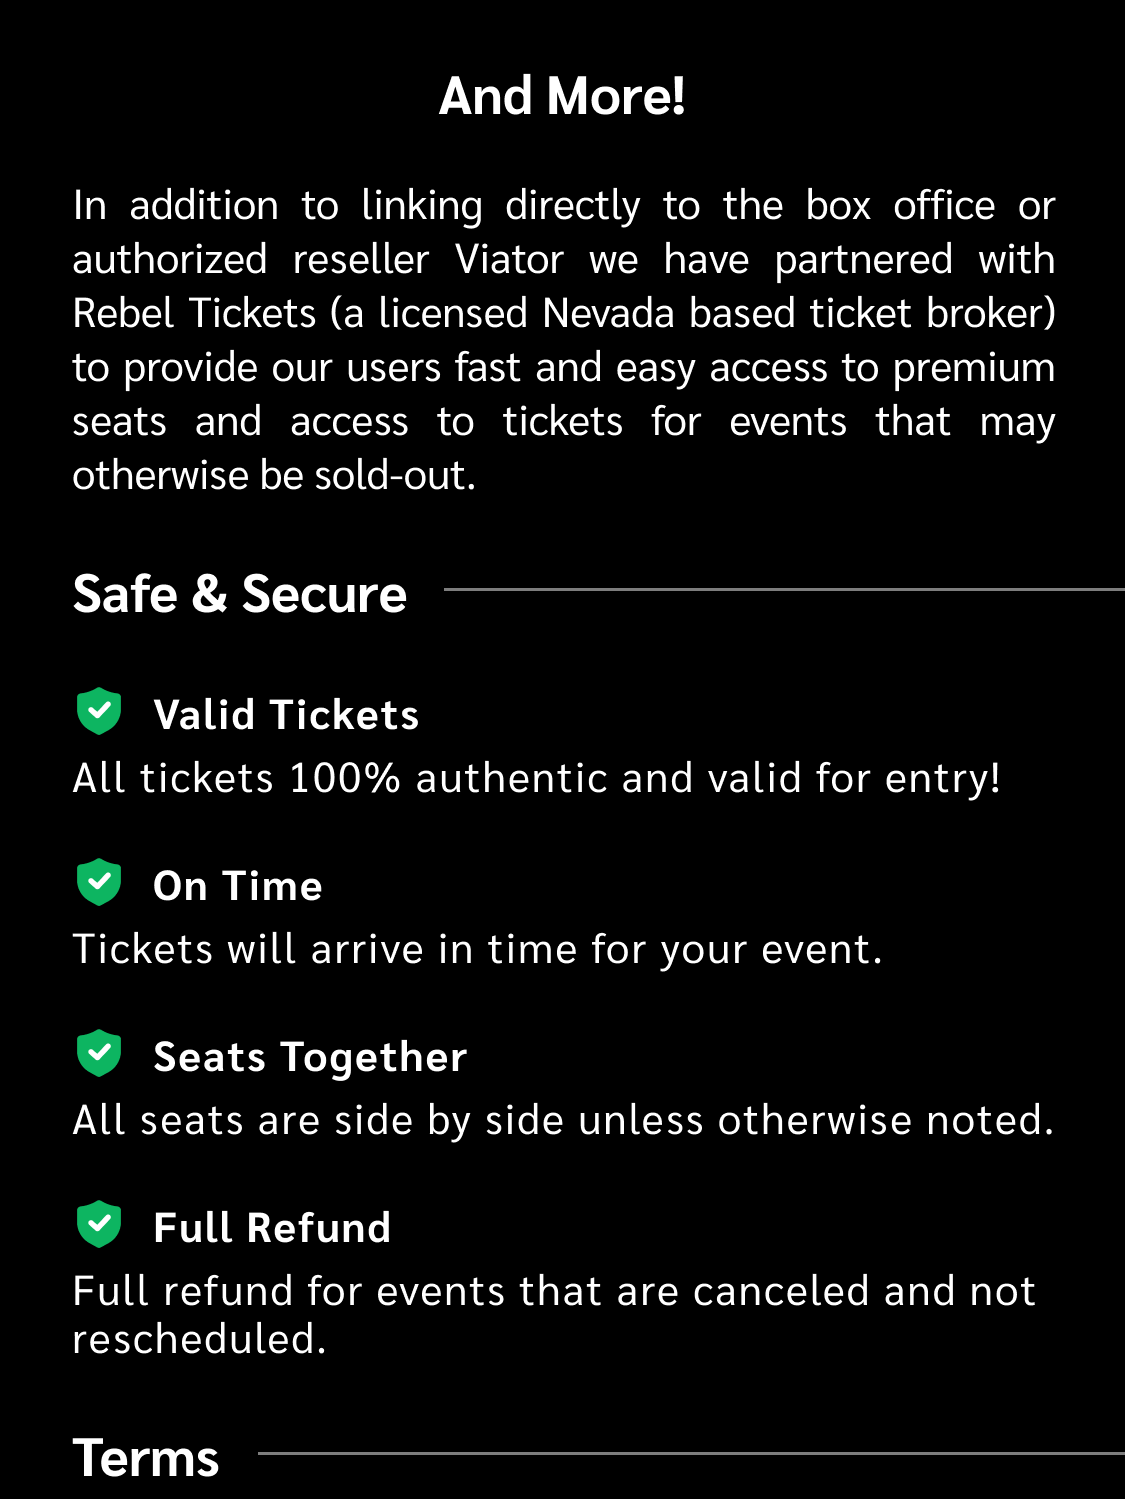 In addition to linking directly to the box office or authorized reseller Viator, we have partnered with Rebel Tickets (a licensed Nevada based ticket broker) to provide our users with fast and easy access to premium seats and access to tickets for events that may otherwise be sold out. Safe & Secure. All tickets 100% authentic and valid for entry! Seats together - all seats are side by side unless otherwise noted. Full refund for events that are cancelled and not rescheduled